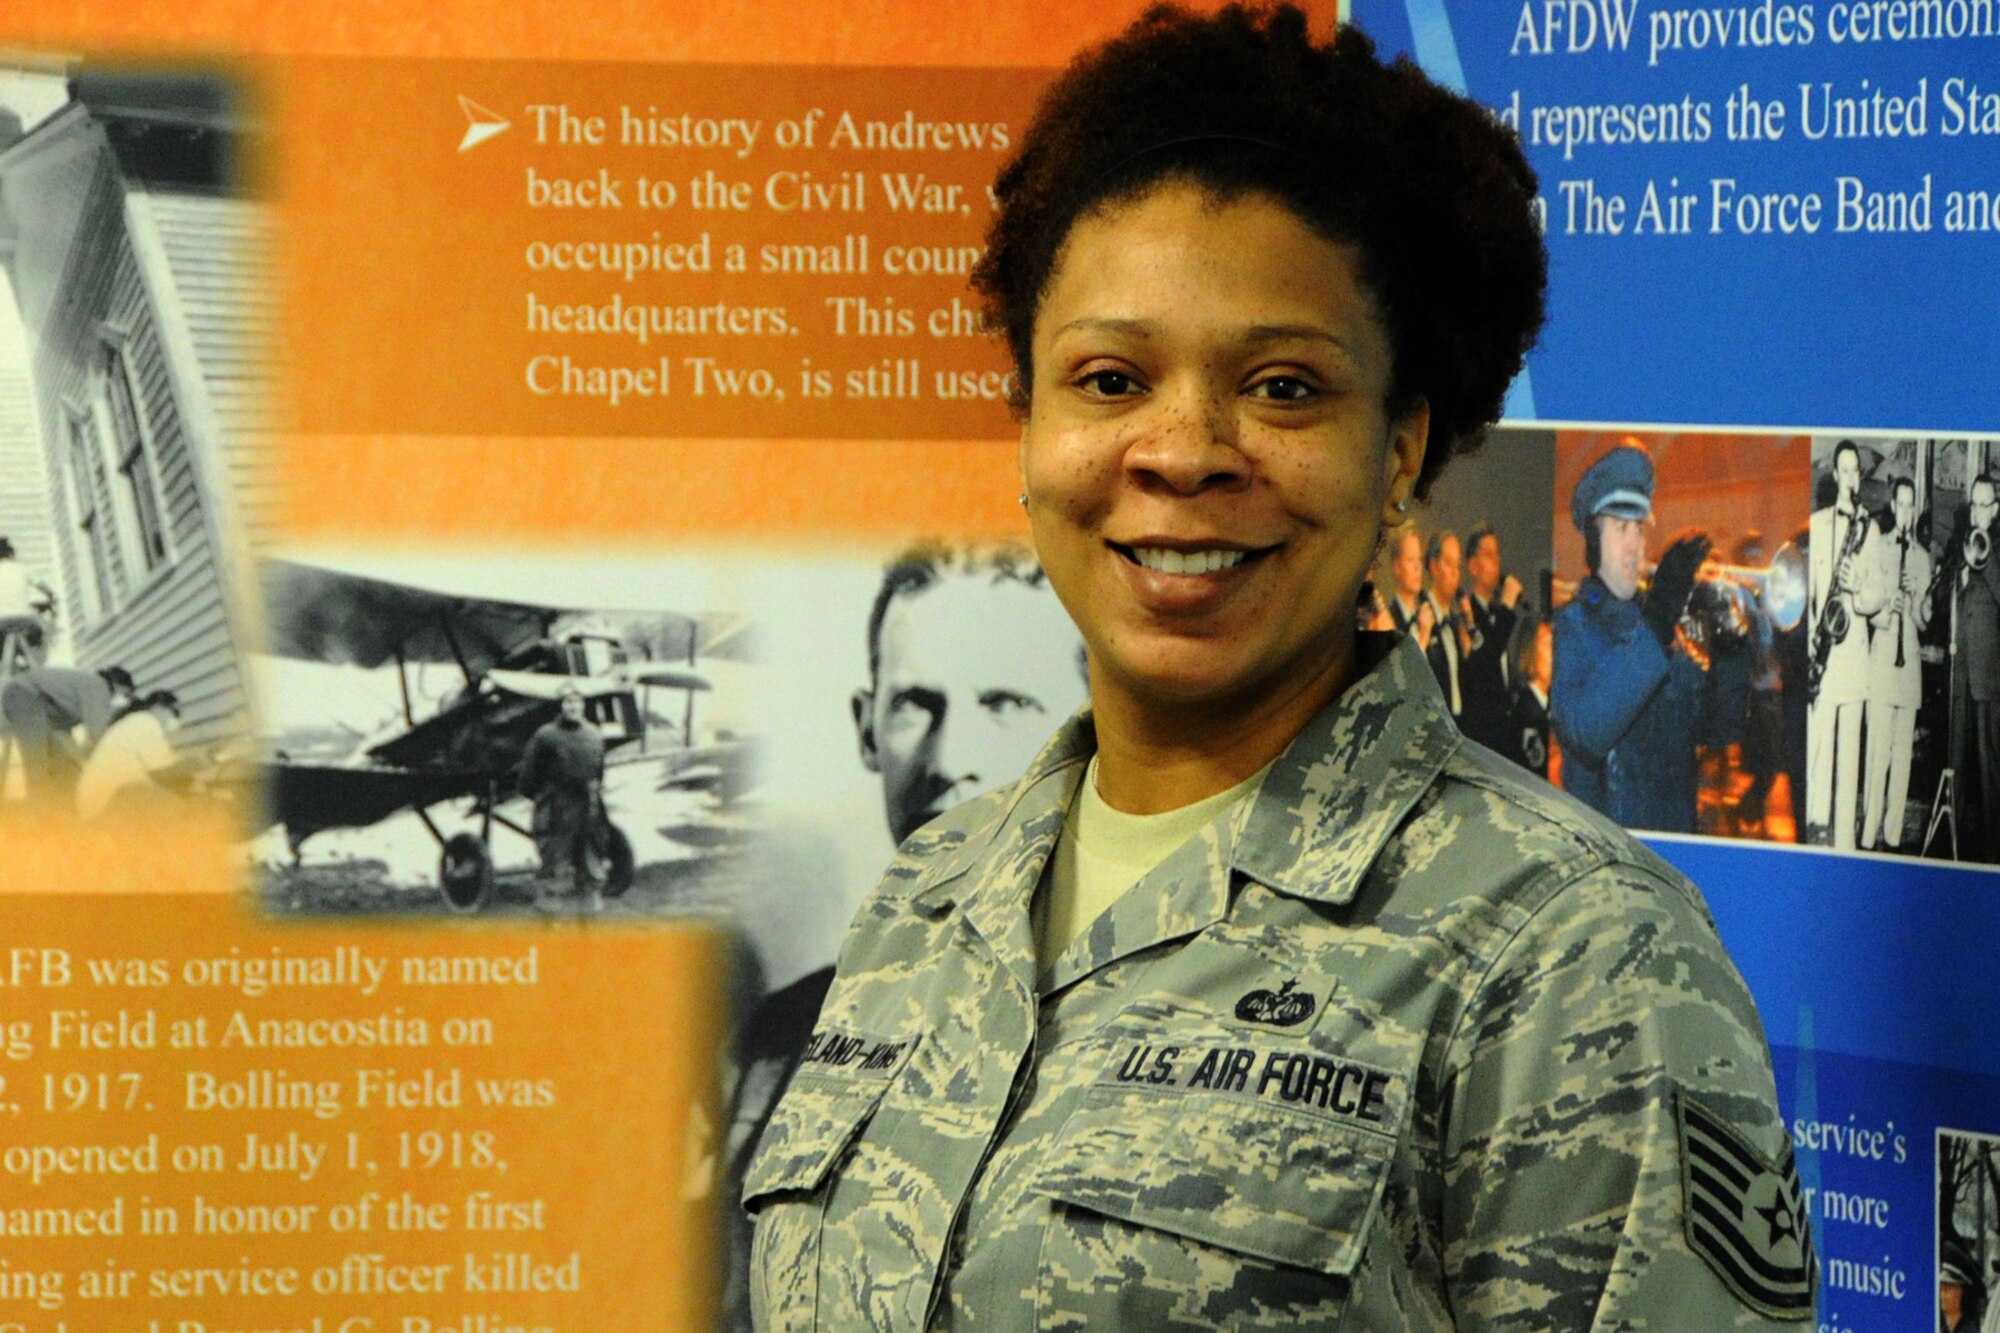 Tech. Sgt. Marcie Strickland-King, an Air Force District of Washington Capital Airman, helps uphold legal integrity within the National Capital Region and across the world. Stricklandking is the NCOIC of military justice in the AFDW Judge Advocate Directorate.  Air Force District of Washington Capital Airmen have made a difference in their units by their outstanding performance. Capital Airmen, selected by AFDW leaders, epitomize the pride, teamwork, and success that drive the AFDW mission. (U.S. Air Force photo/Tech Sgt. Matt Davis)